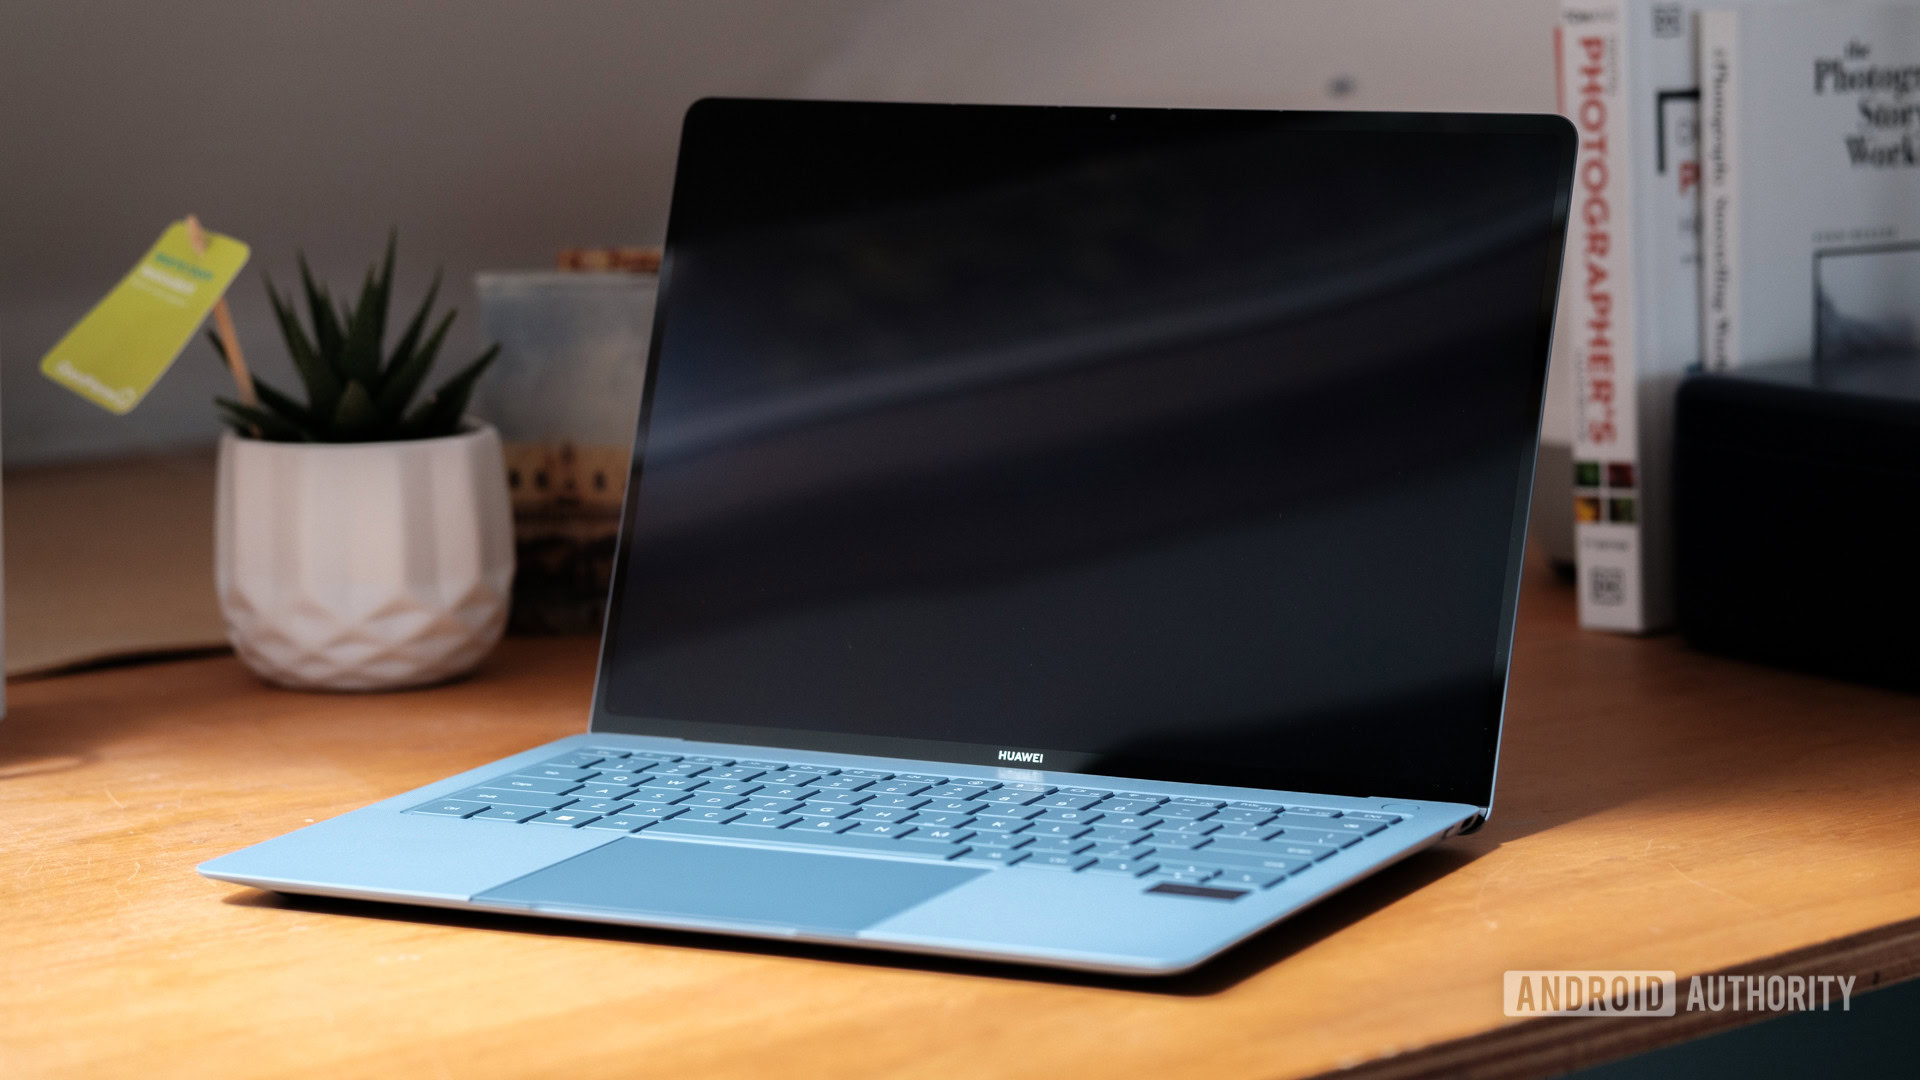 HUAWEI refreshes laptop lineup with new MateBook X Pro and MateBook 14